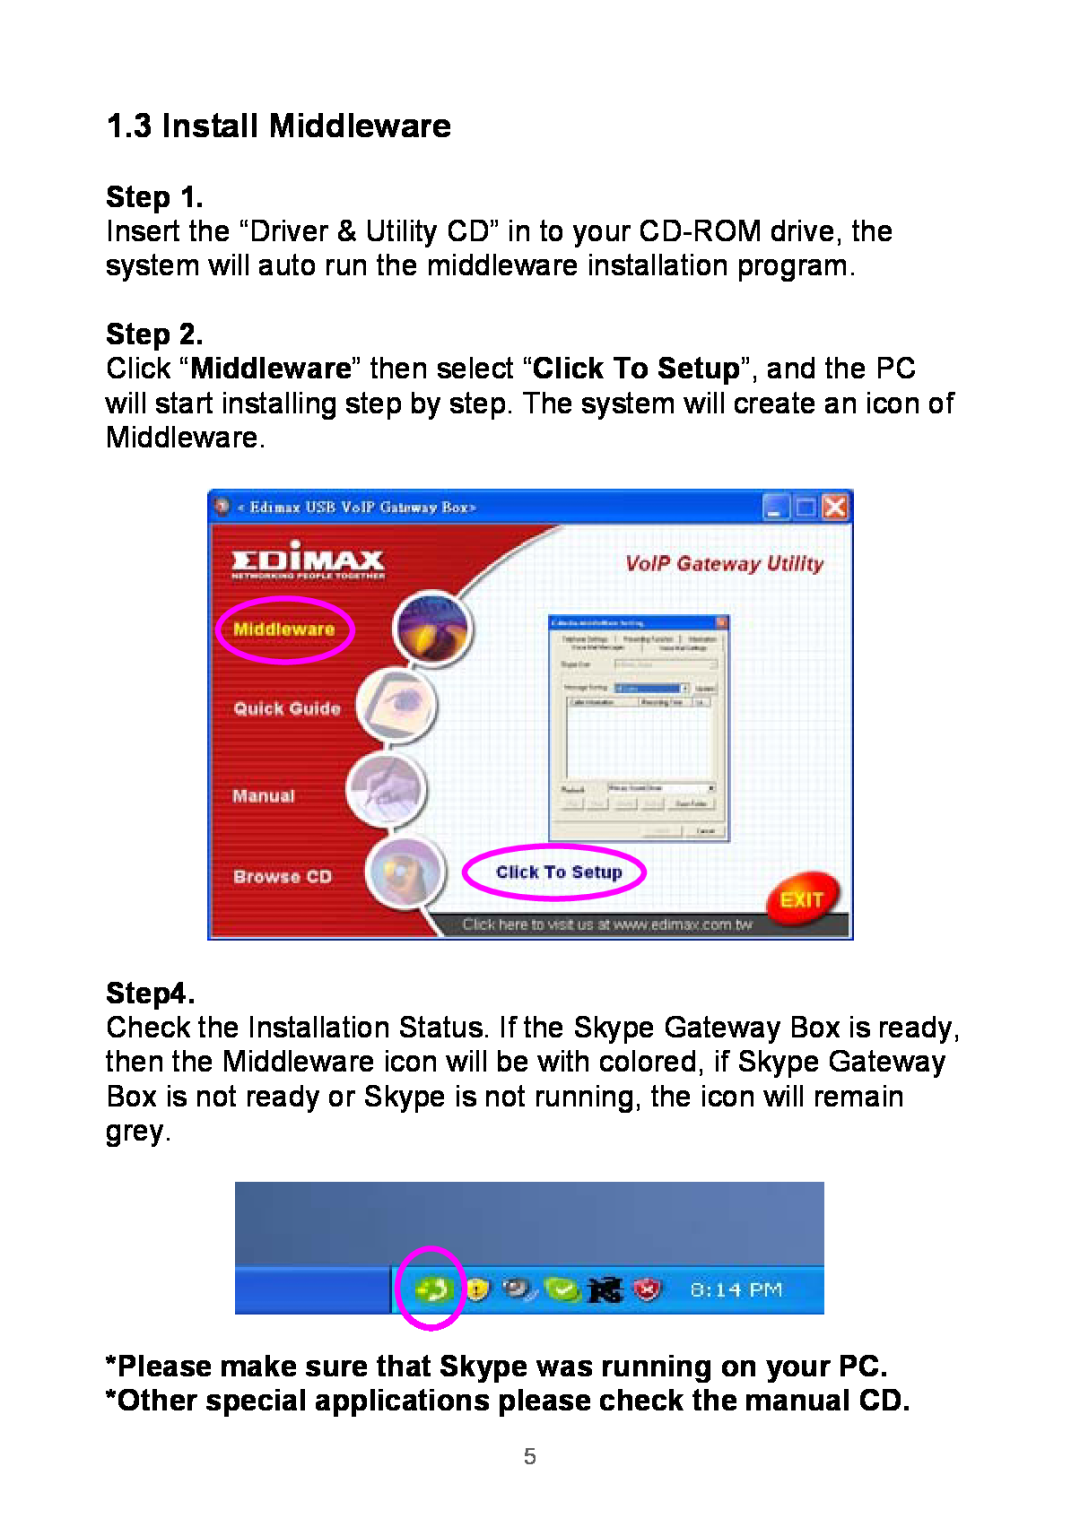 Edimax Technology None manual Install Middleware, Step 